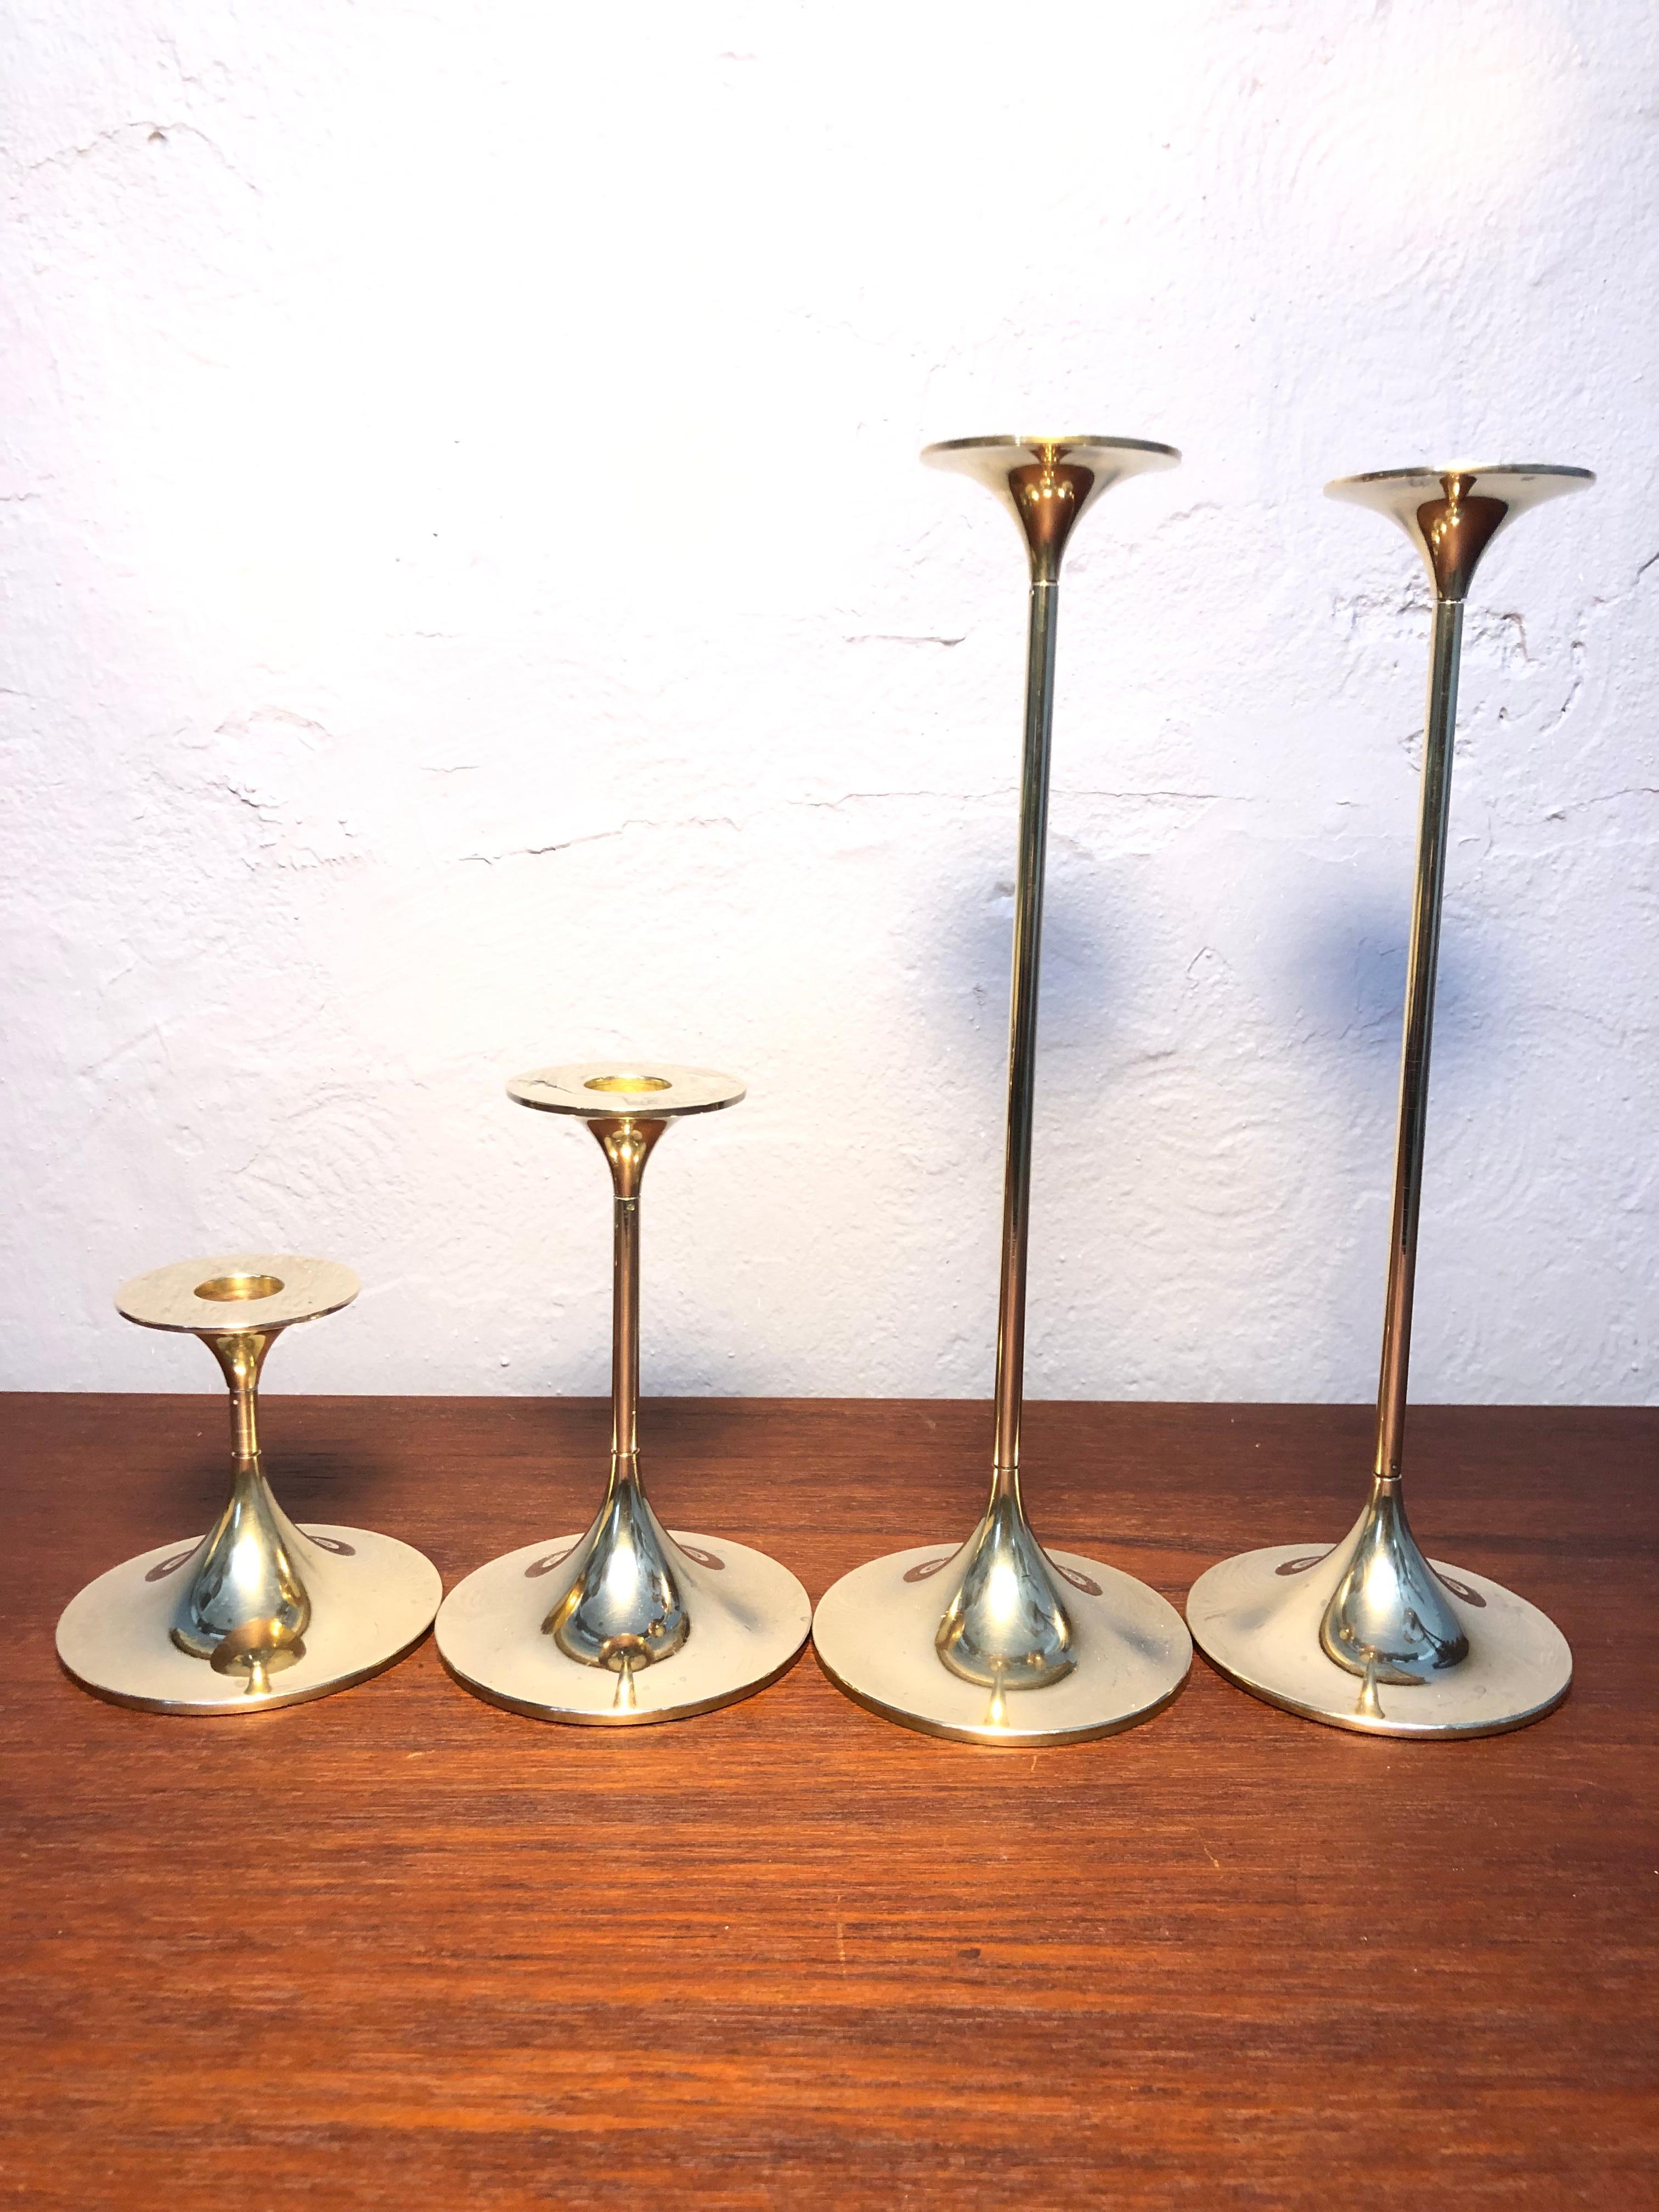 A set of 4 Mid-Century Modern brass candle holders designed by world famous architect Max Bruel for Torben Ørskov of Copenhagen.
Measures: Four heights 9, 13 and 27cm and 27cm.
Stamped at the base and top “TØ made in Denmark“.
Have been lightly